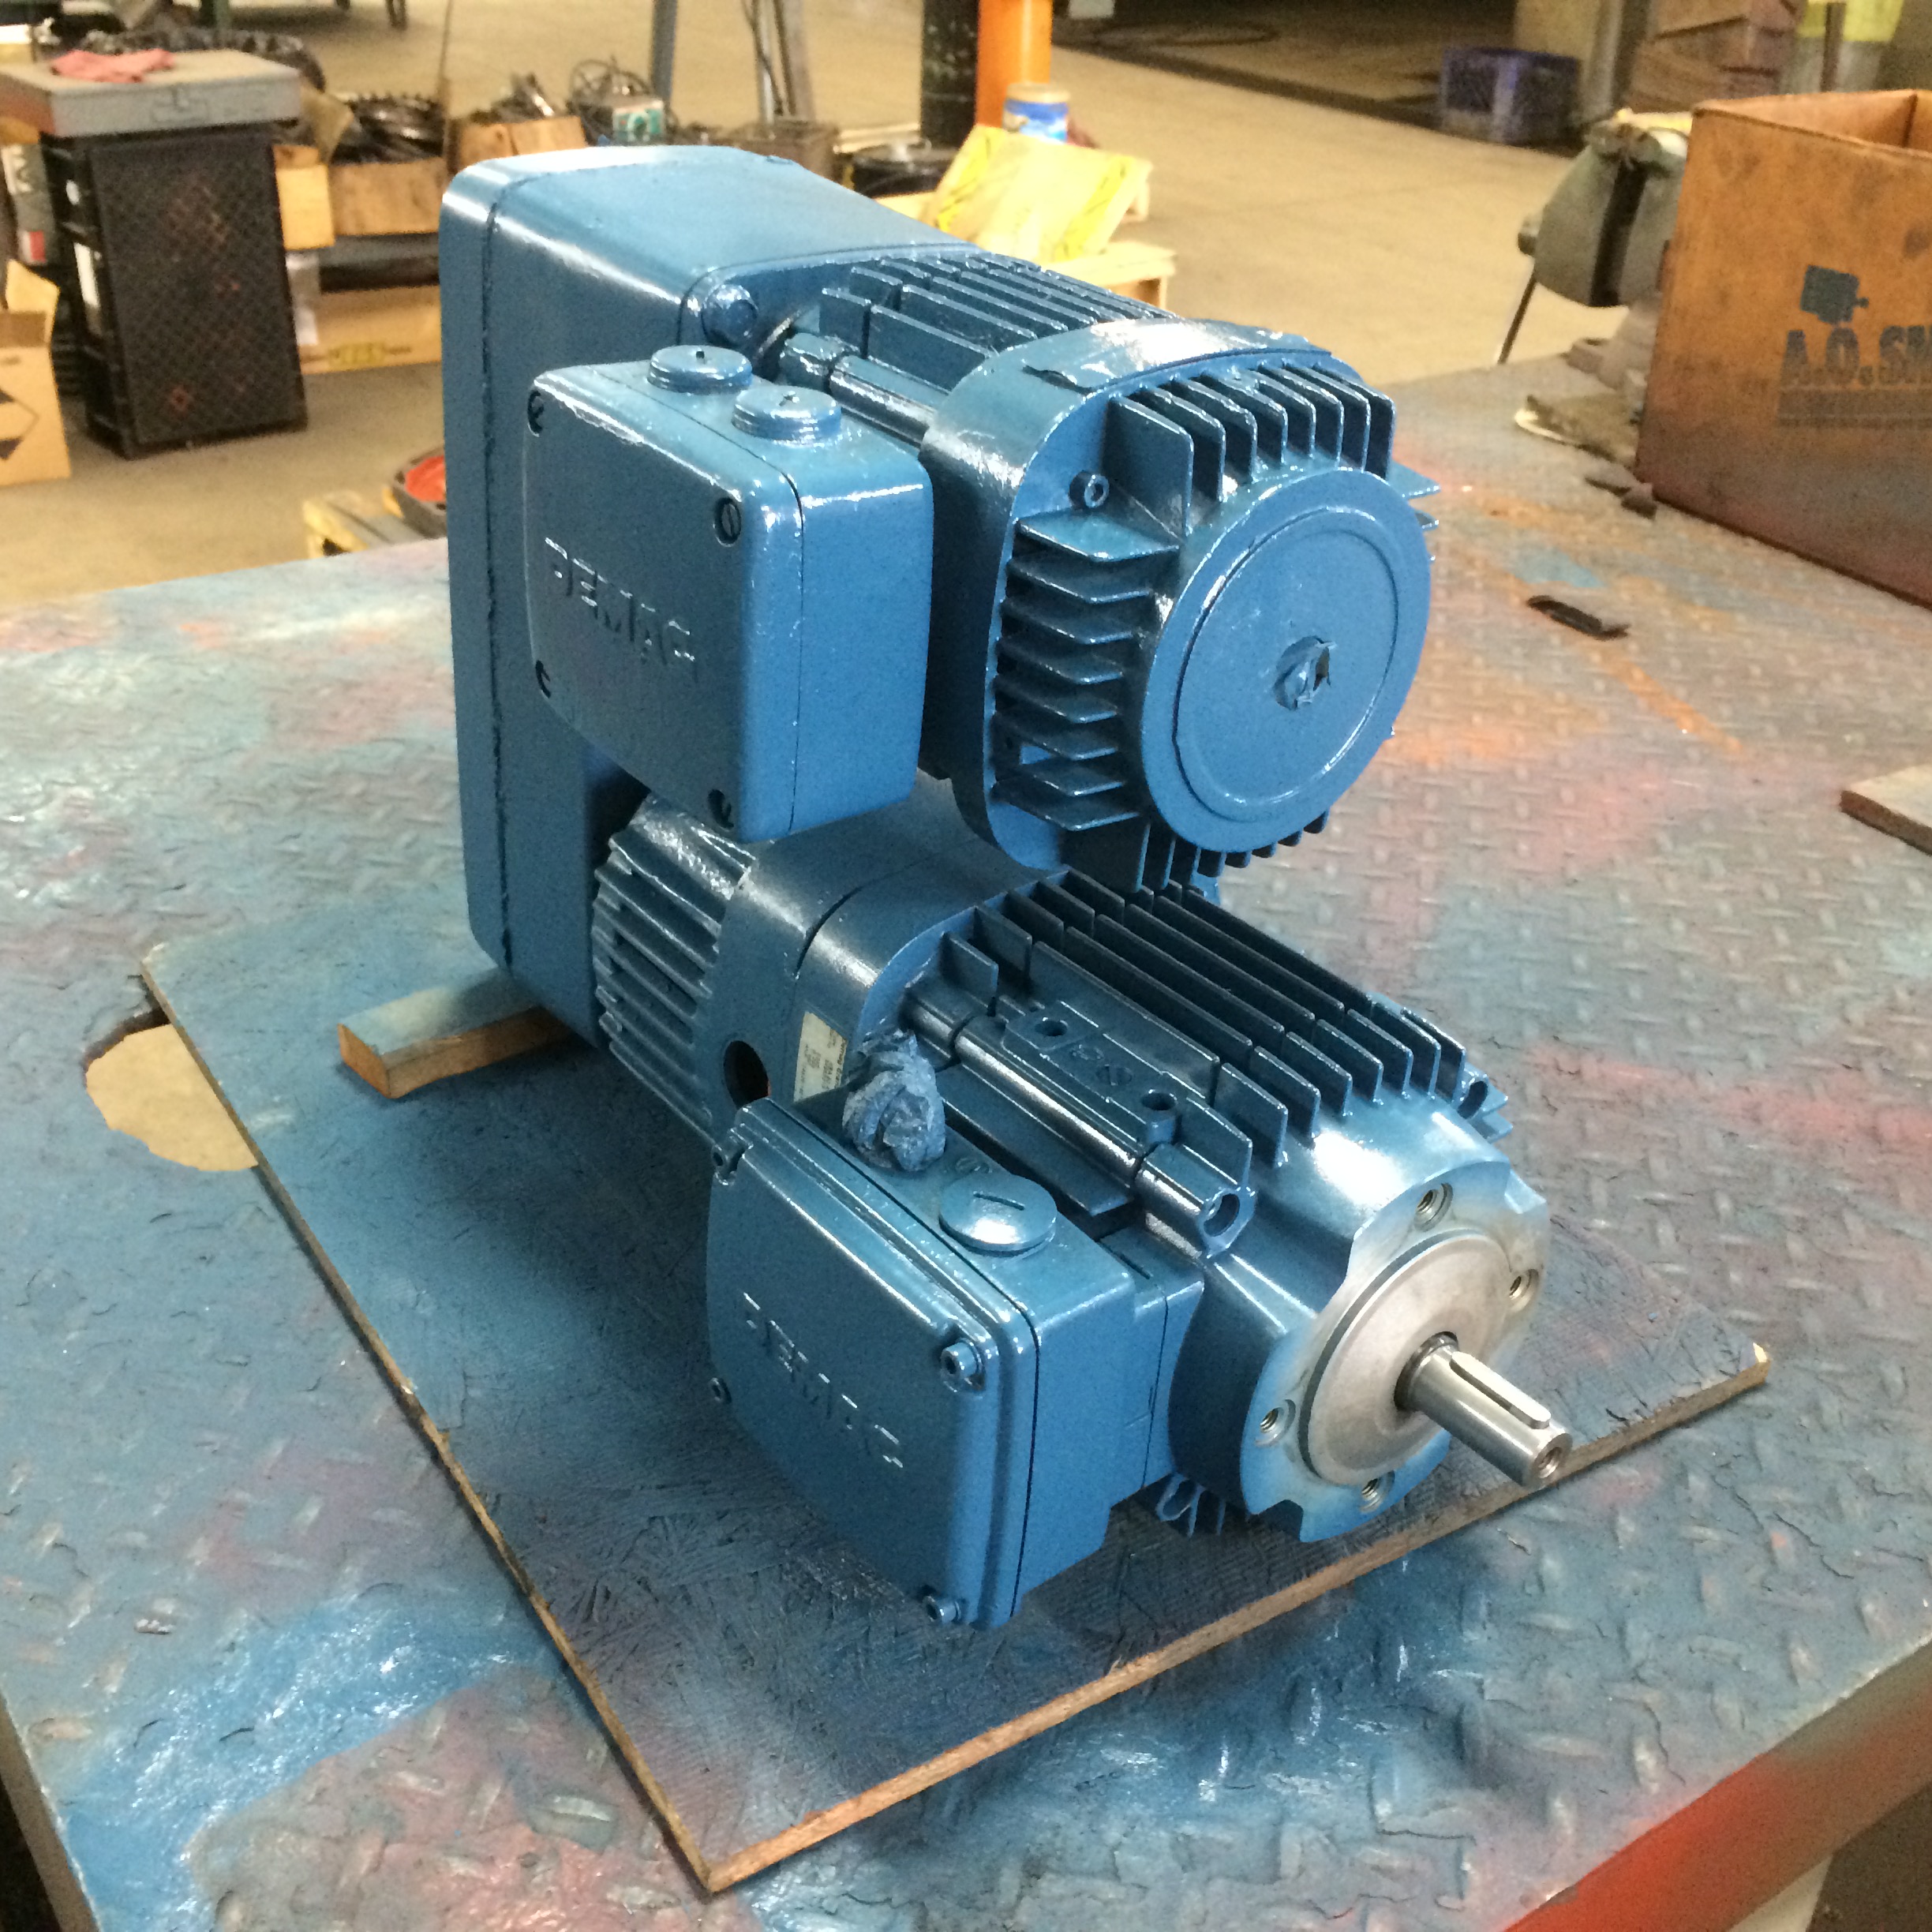 Revive your demag electric motor